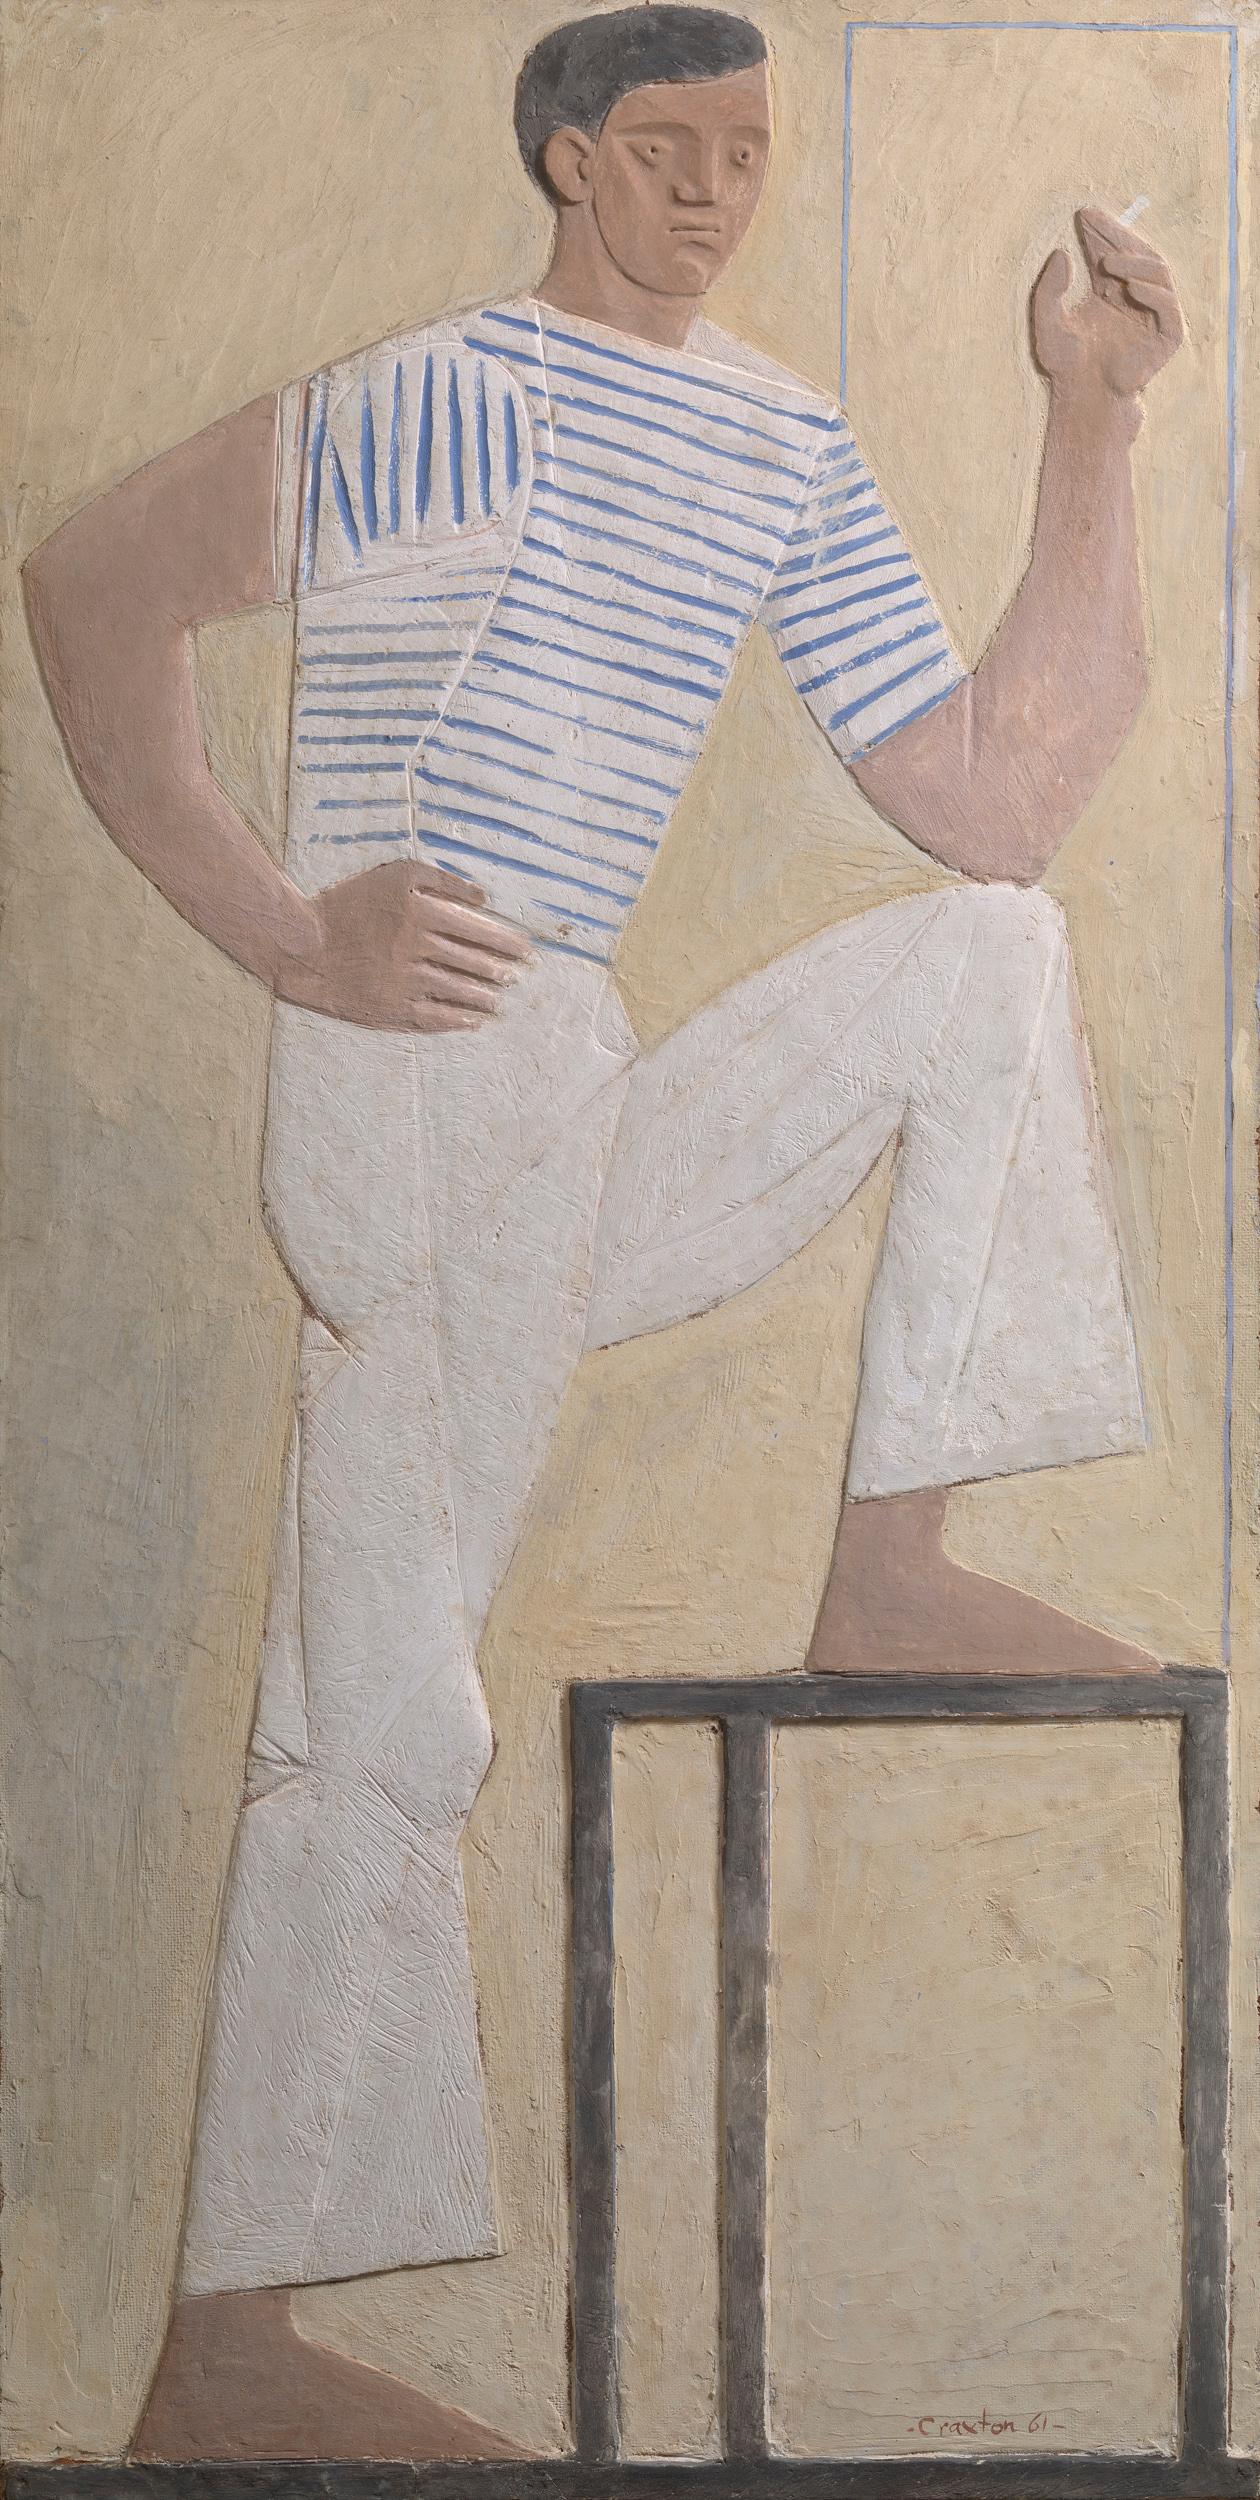 Young Man with Cigarette - 20th Century, Mixed media on board by John Craxton